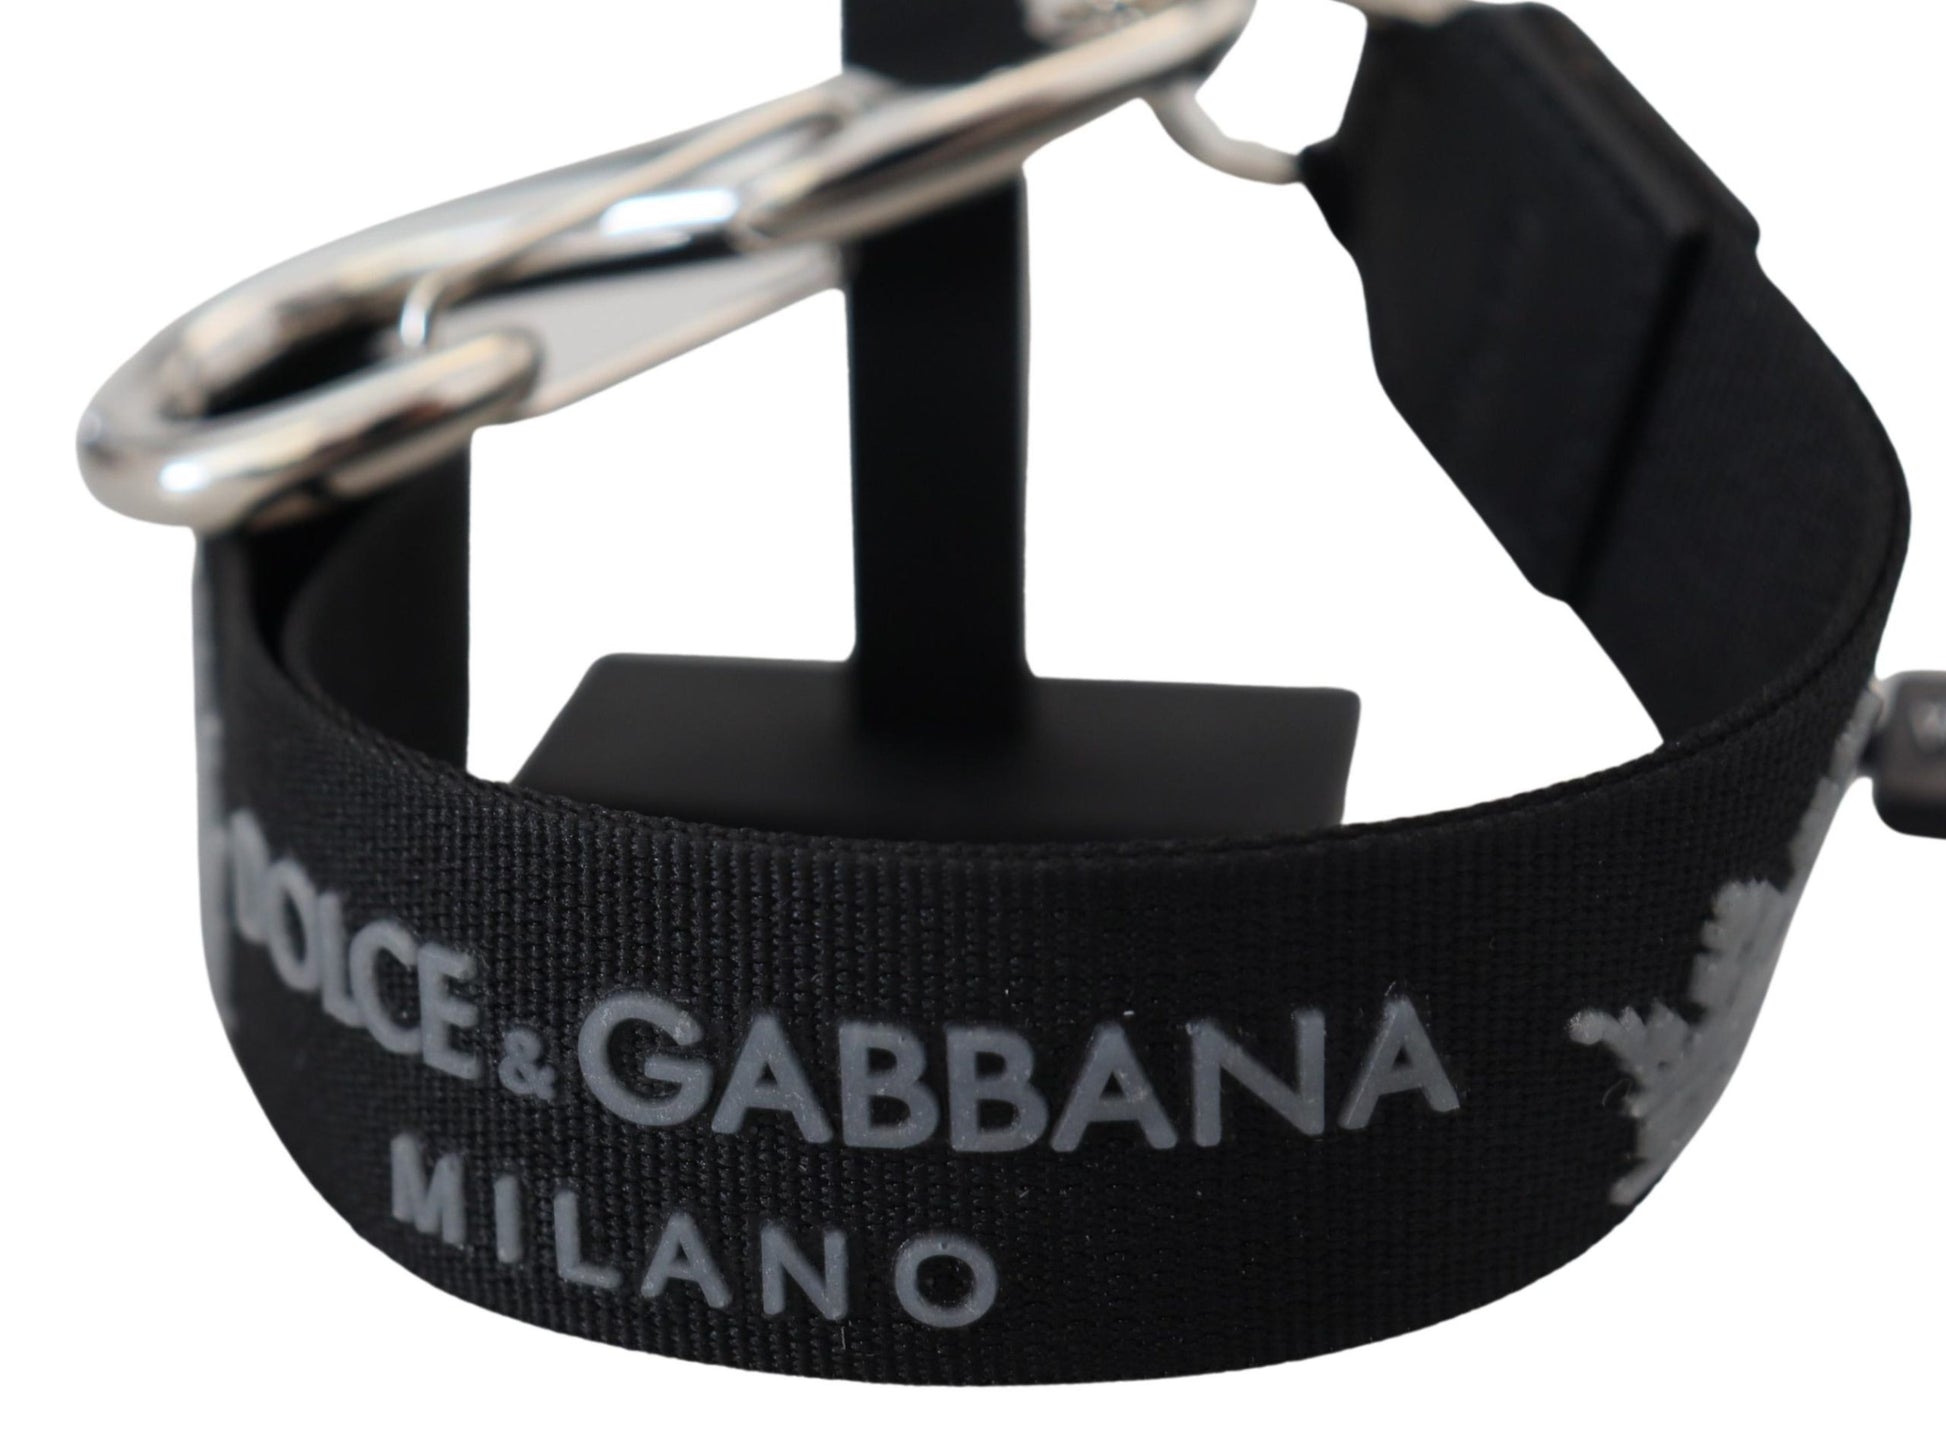 Dolce & Gabbana Black Polyester Logo Silver Tone Brass Keychain - Designed by Dolce & Gabbana Available to Buy at a Discounted Price on Moon Behind The Hill Online Designer Discount Store